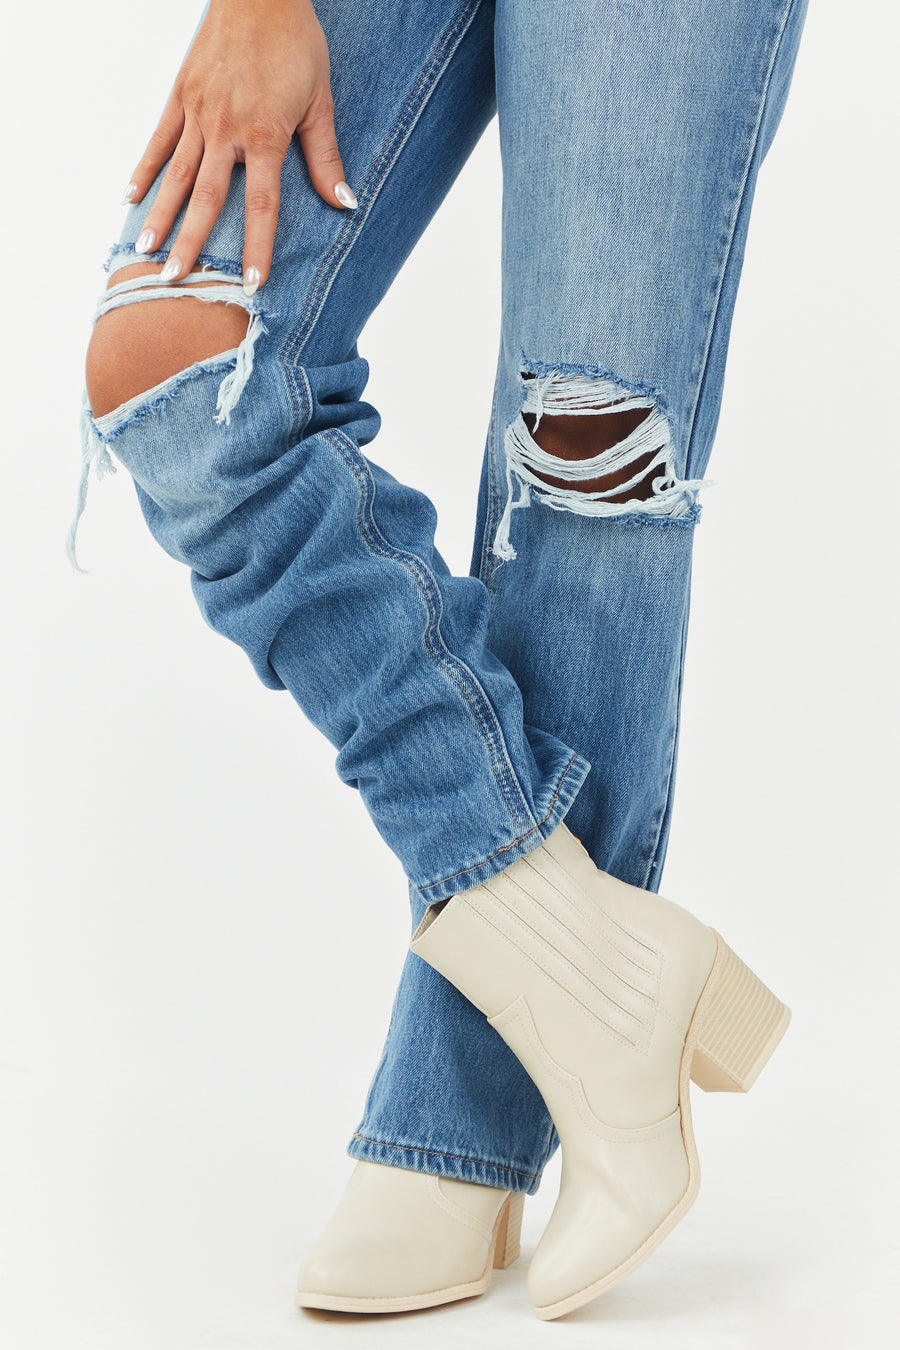 Coconut Faux Leather Western Ankle Boots